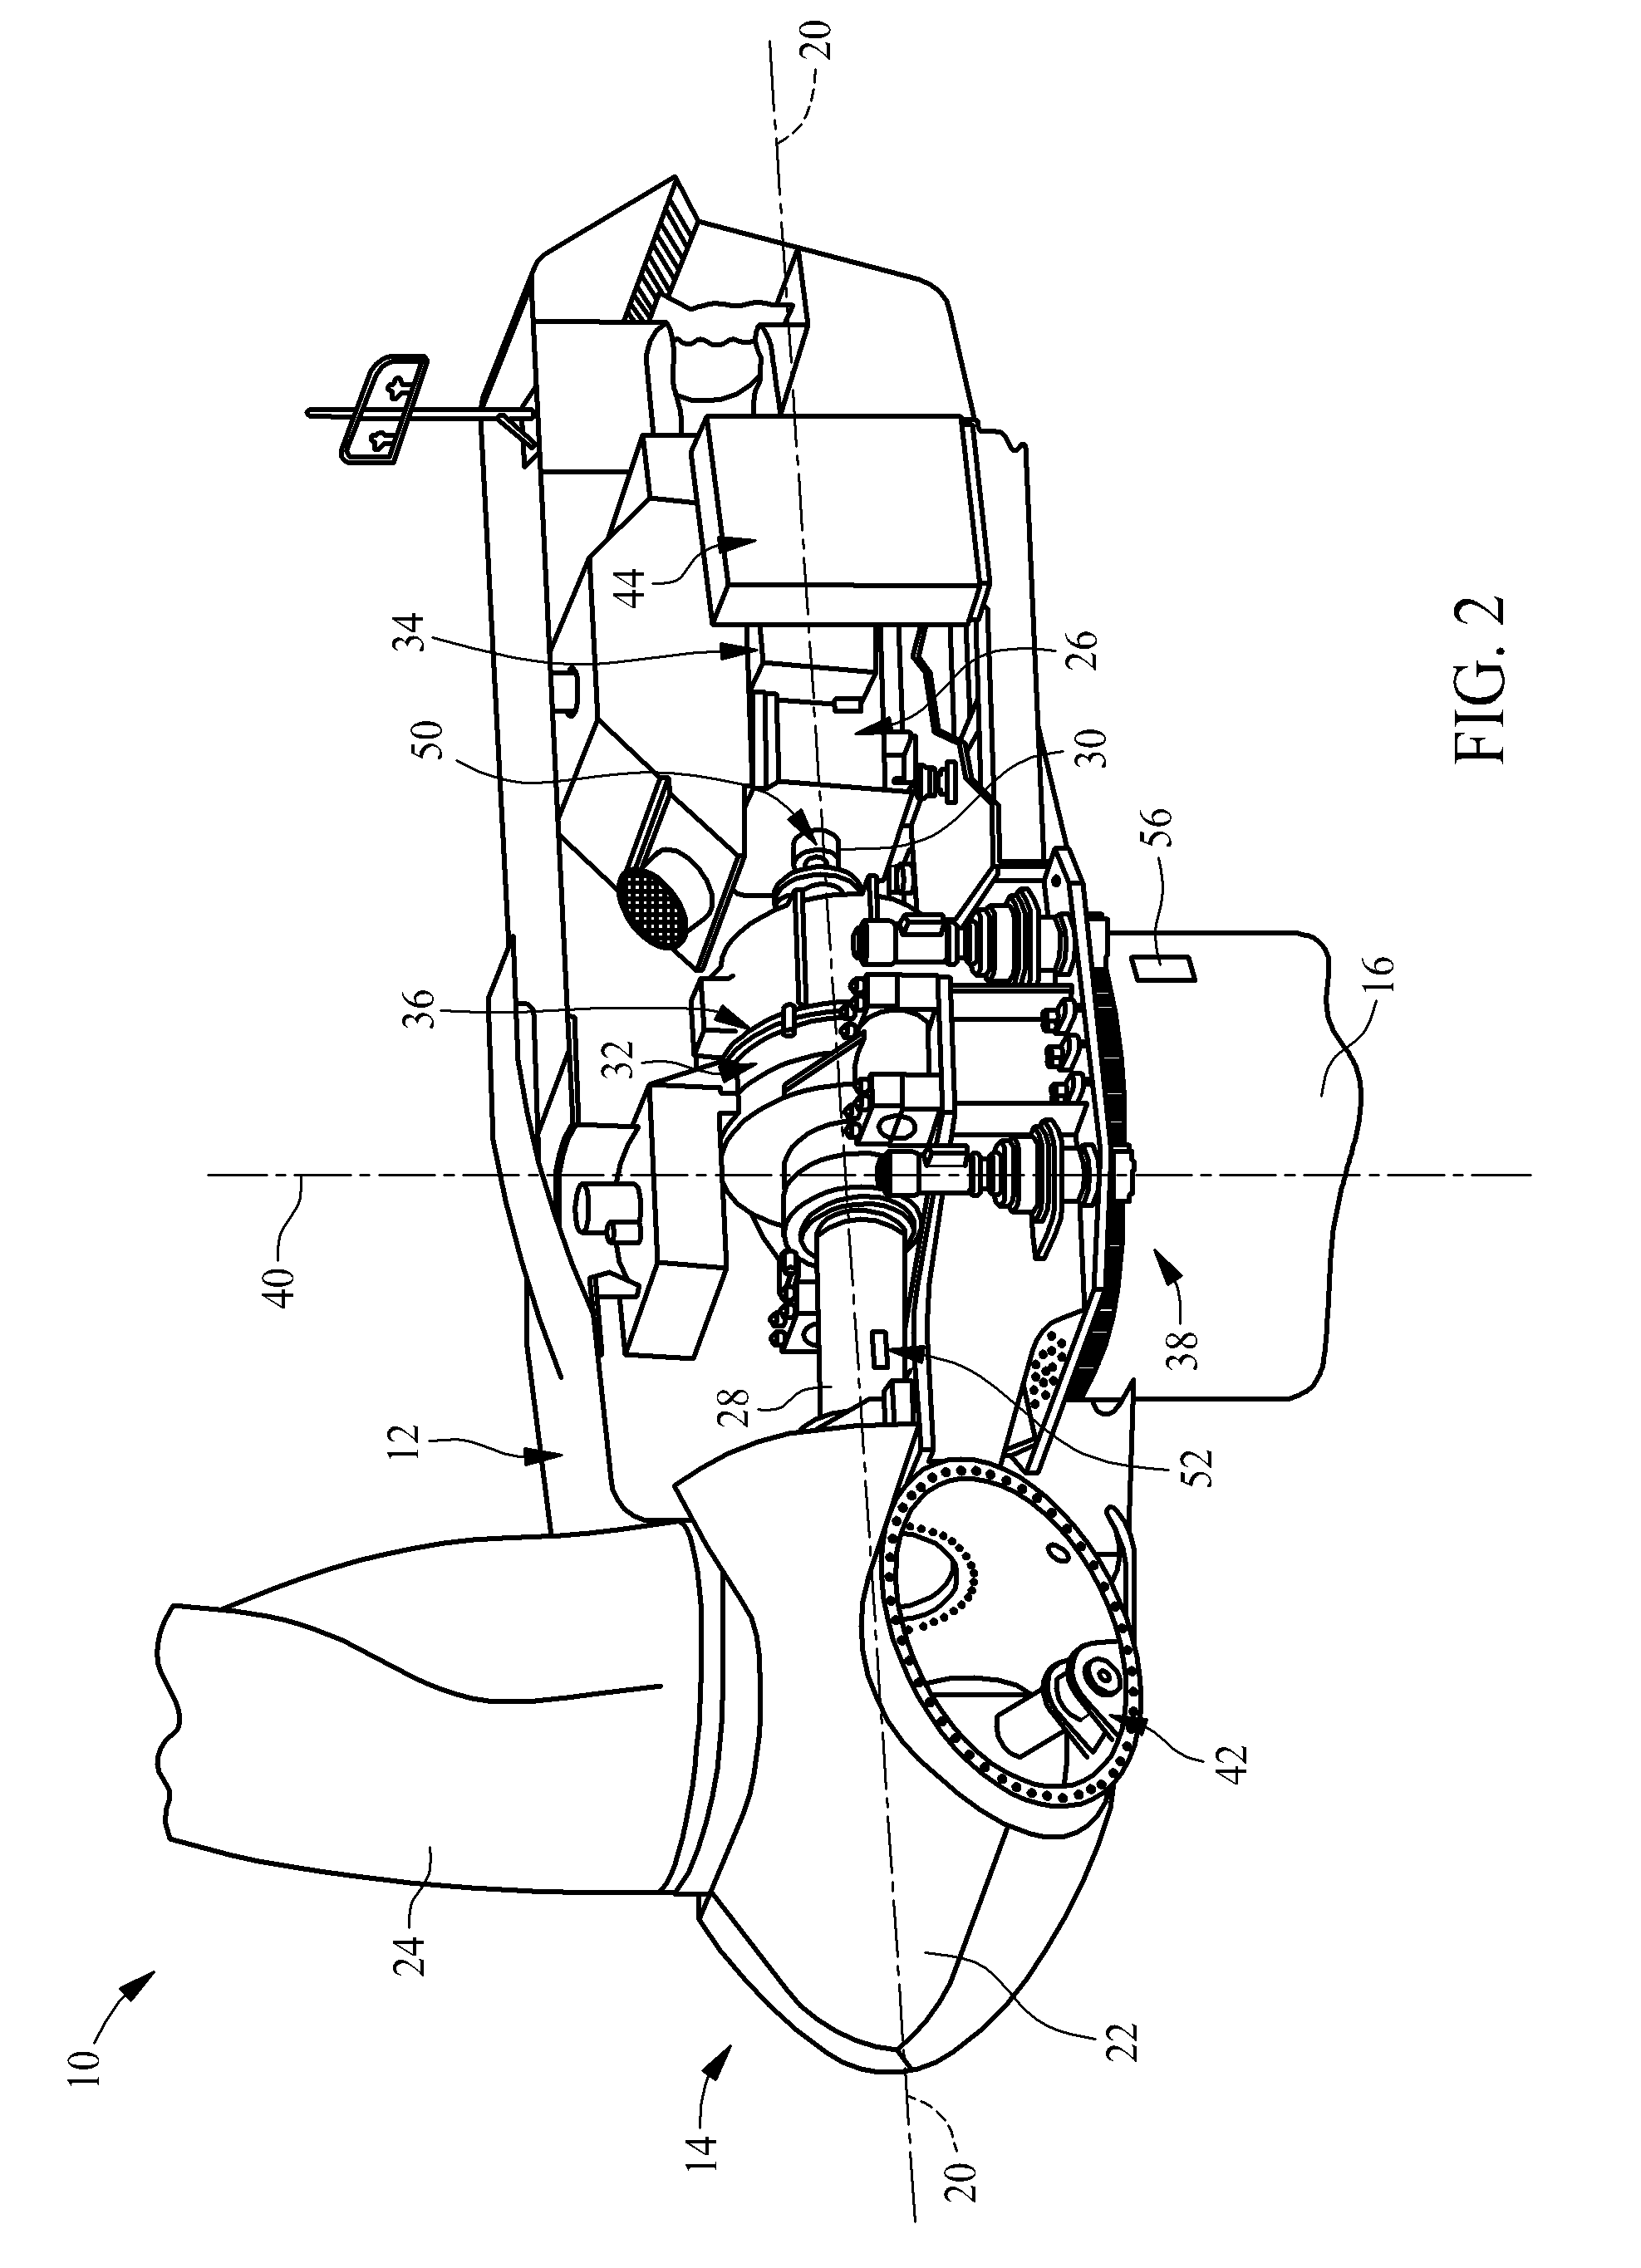 Methods and systems for operating a wind turbine